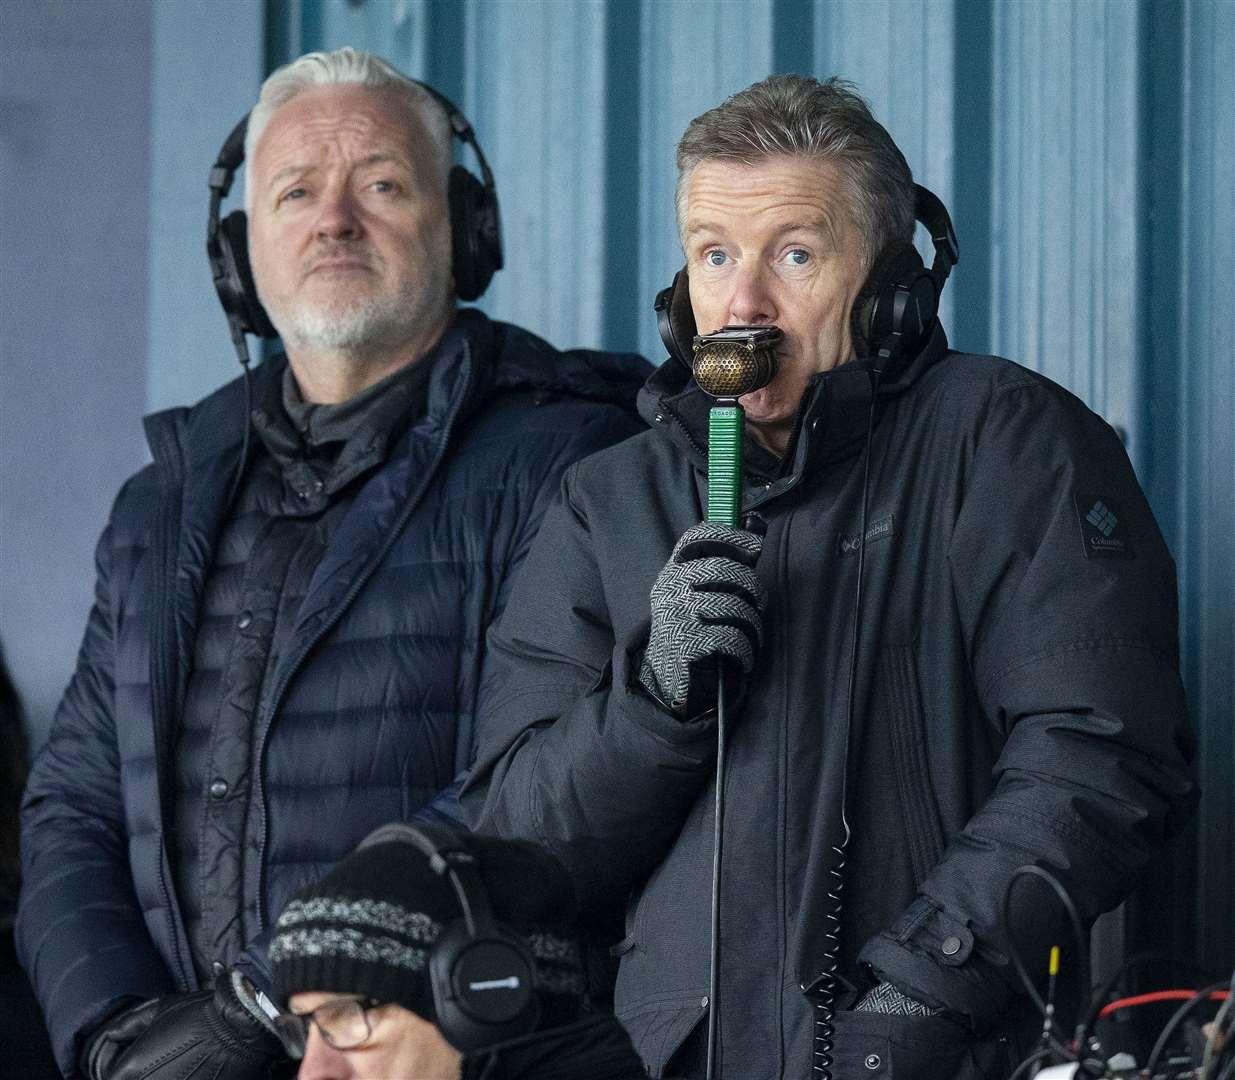 Charlie Christie provided expert analysis to the BBC's Rob McLean during live commentary of the game.